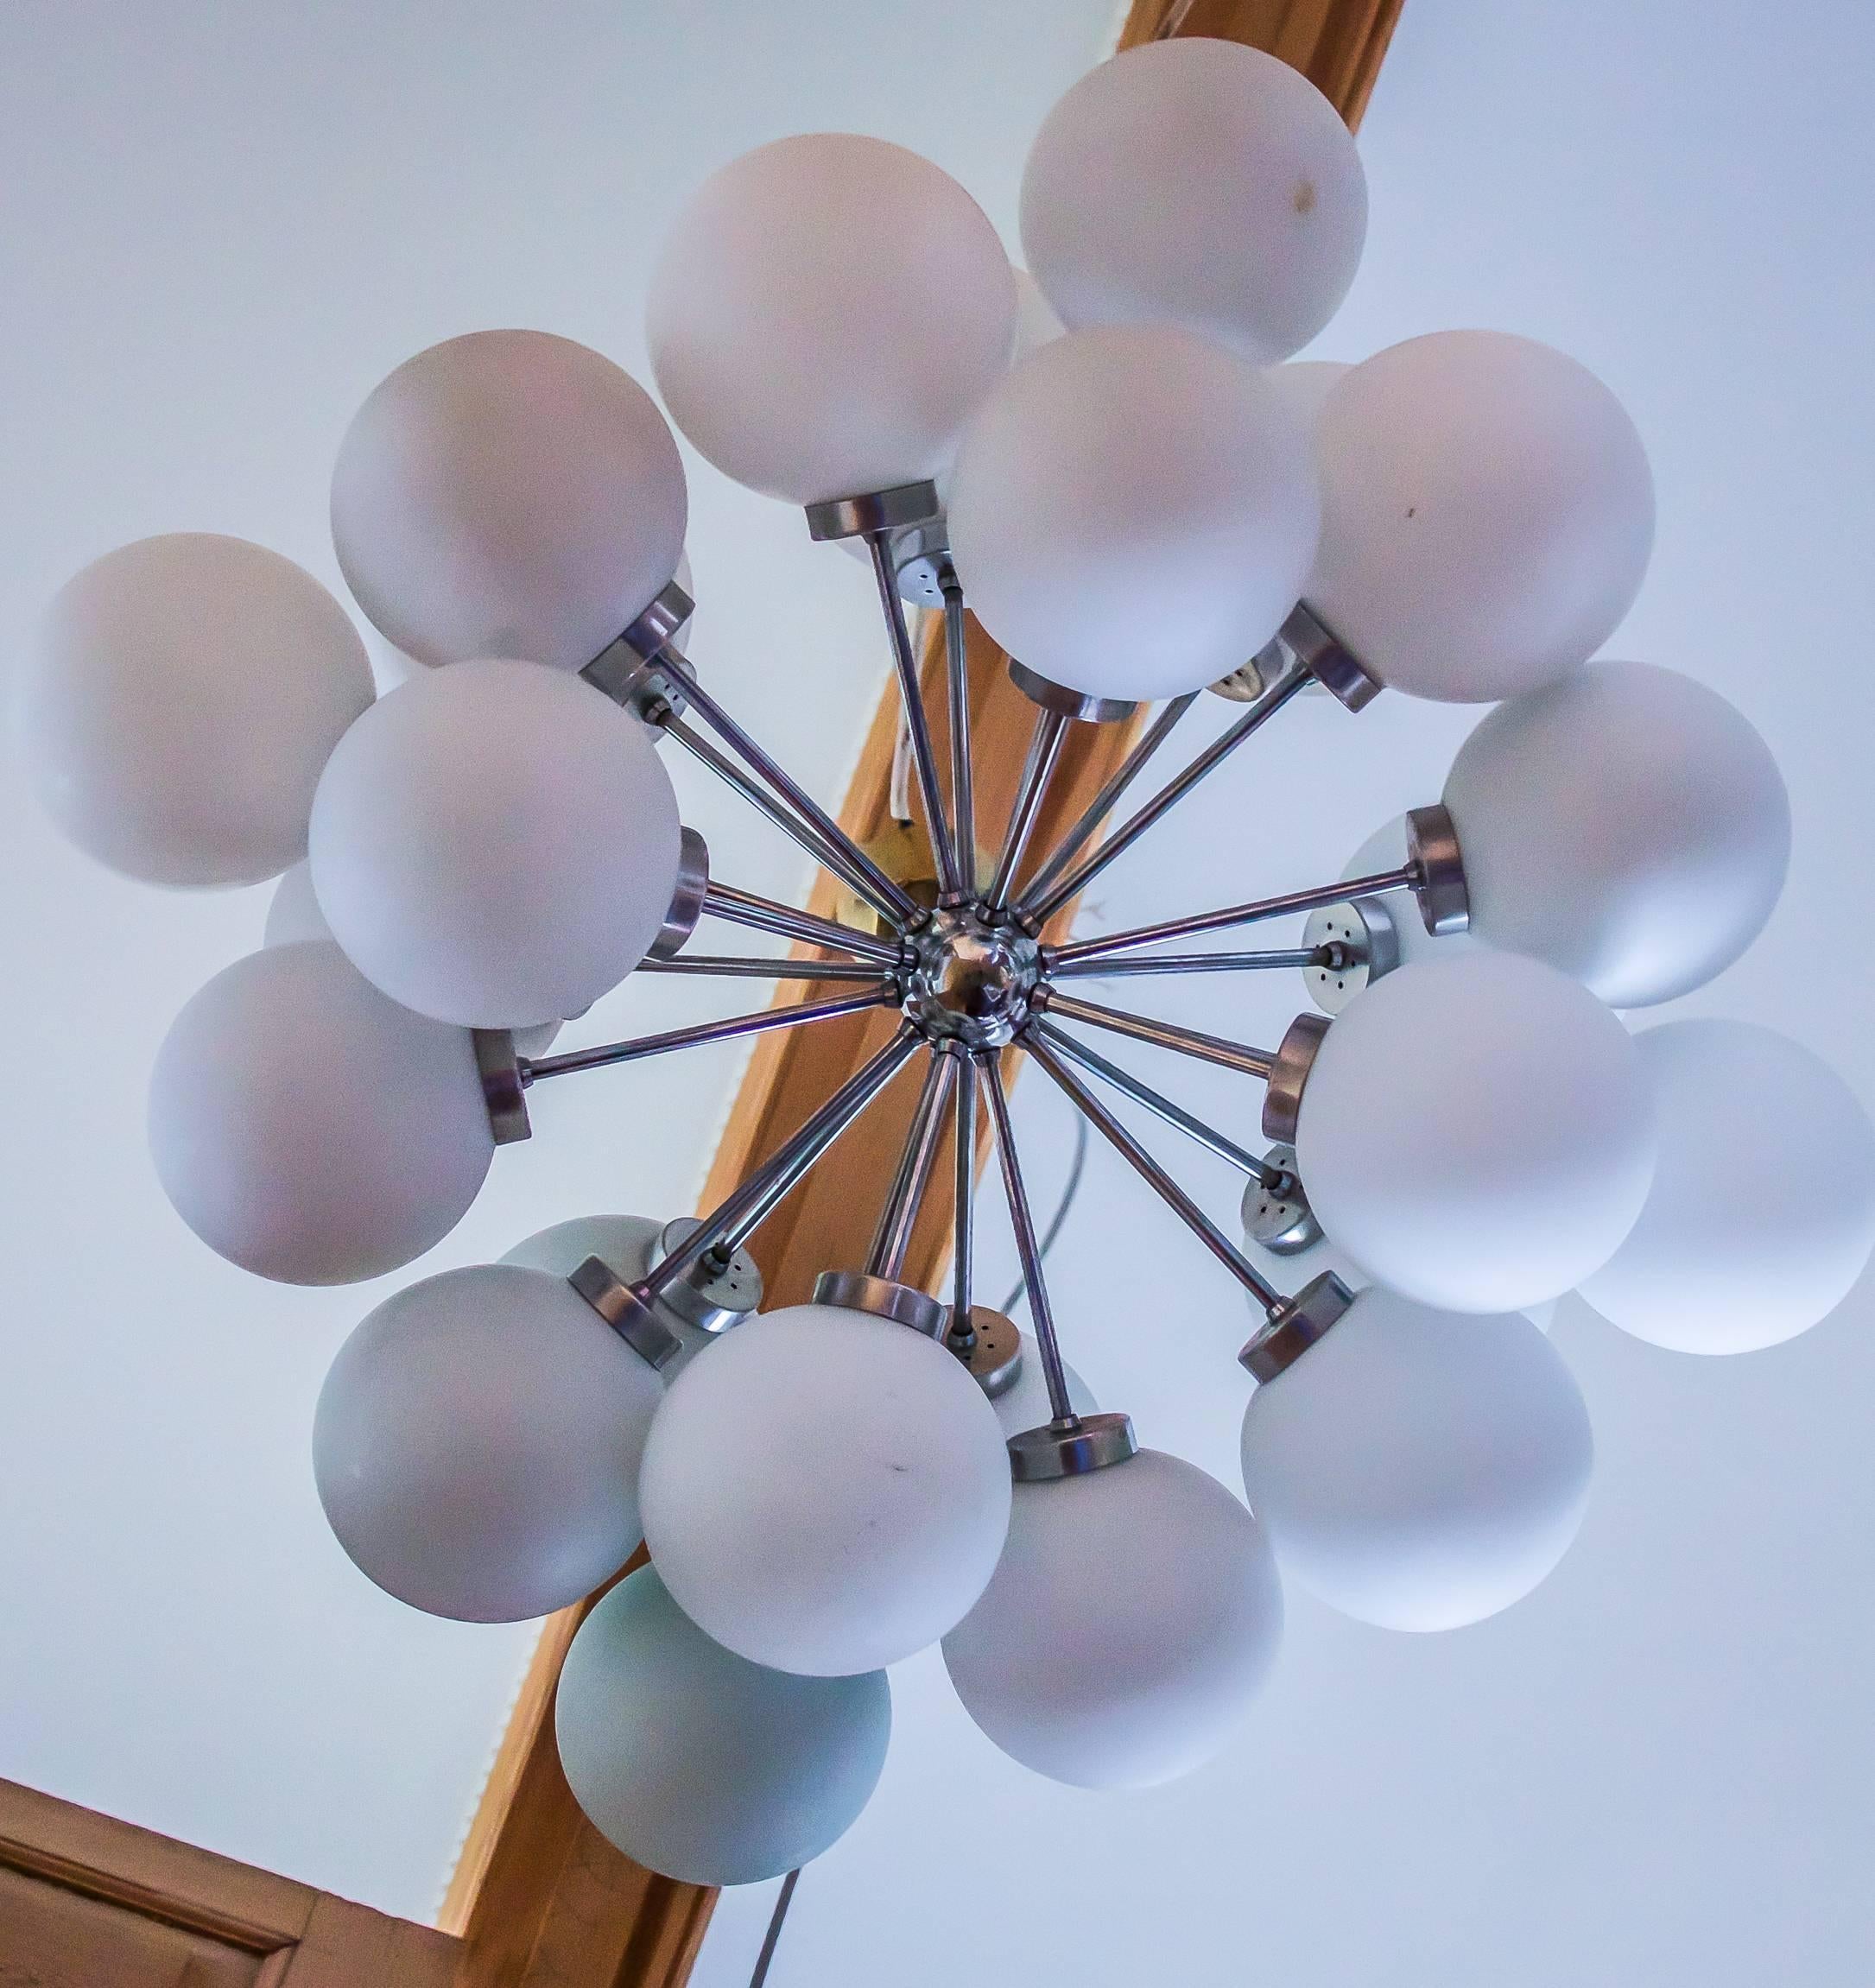 Great and very straight German Design by Richard Essig, from 1965, Space Age,
Twenty-four-light Starburst Sputnik chandelier in chrome. 

Large chrome chandelier with 24. Opaque glass lampshades. Gives a wonderful warm, shadow free light.